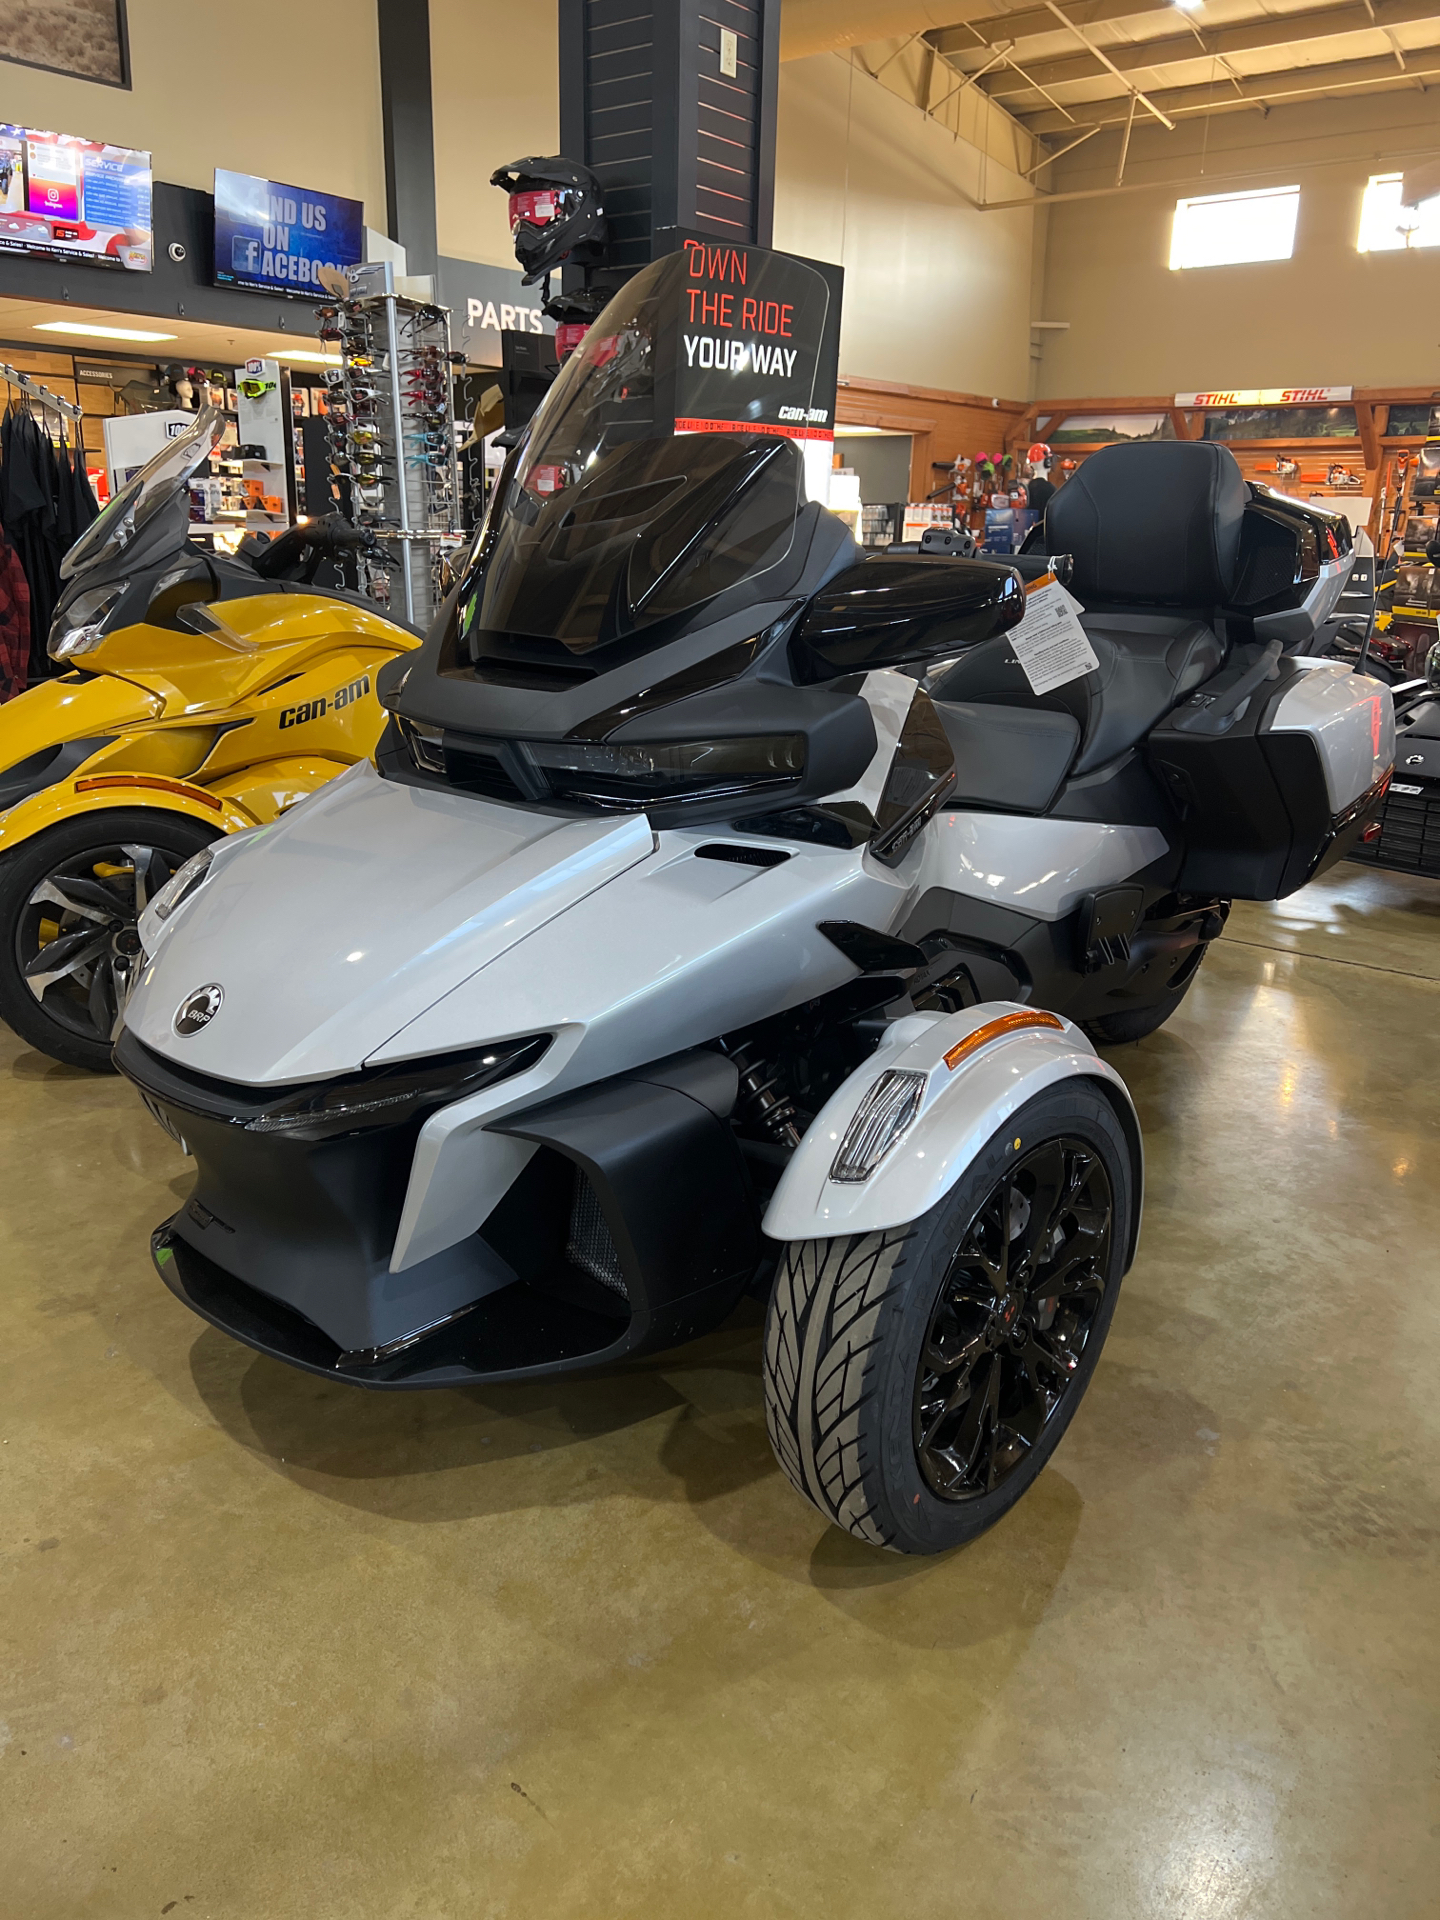 2023 Can-Am Spyder RT Limited in Elma, New York - Photo 1